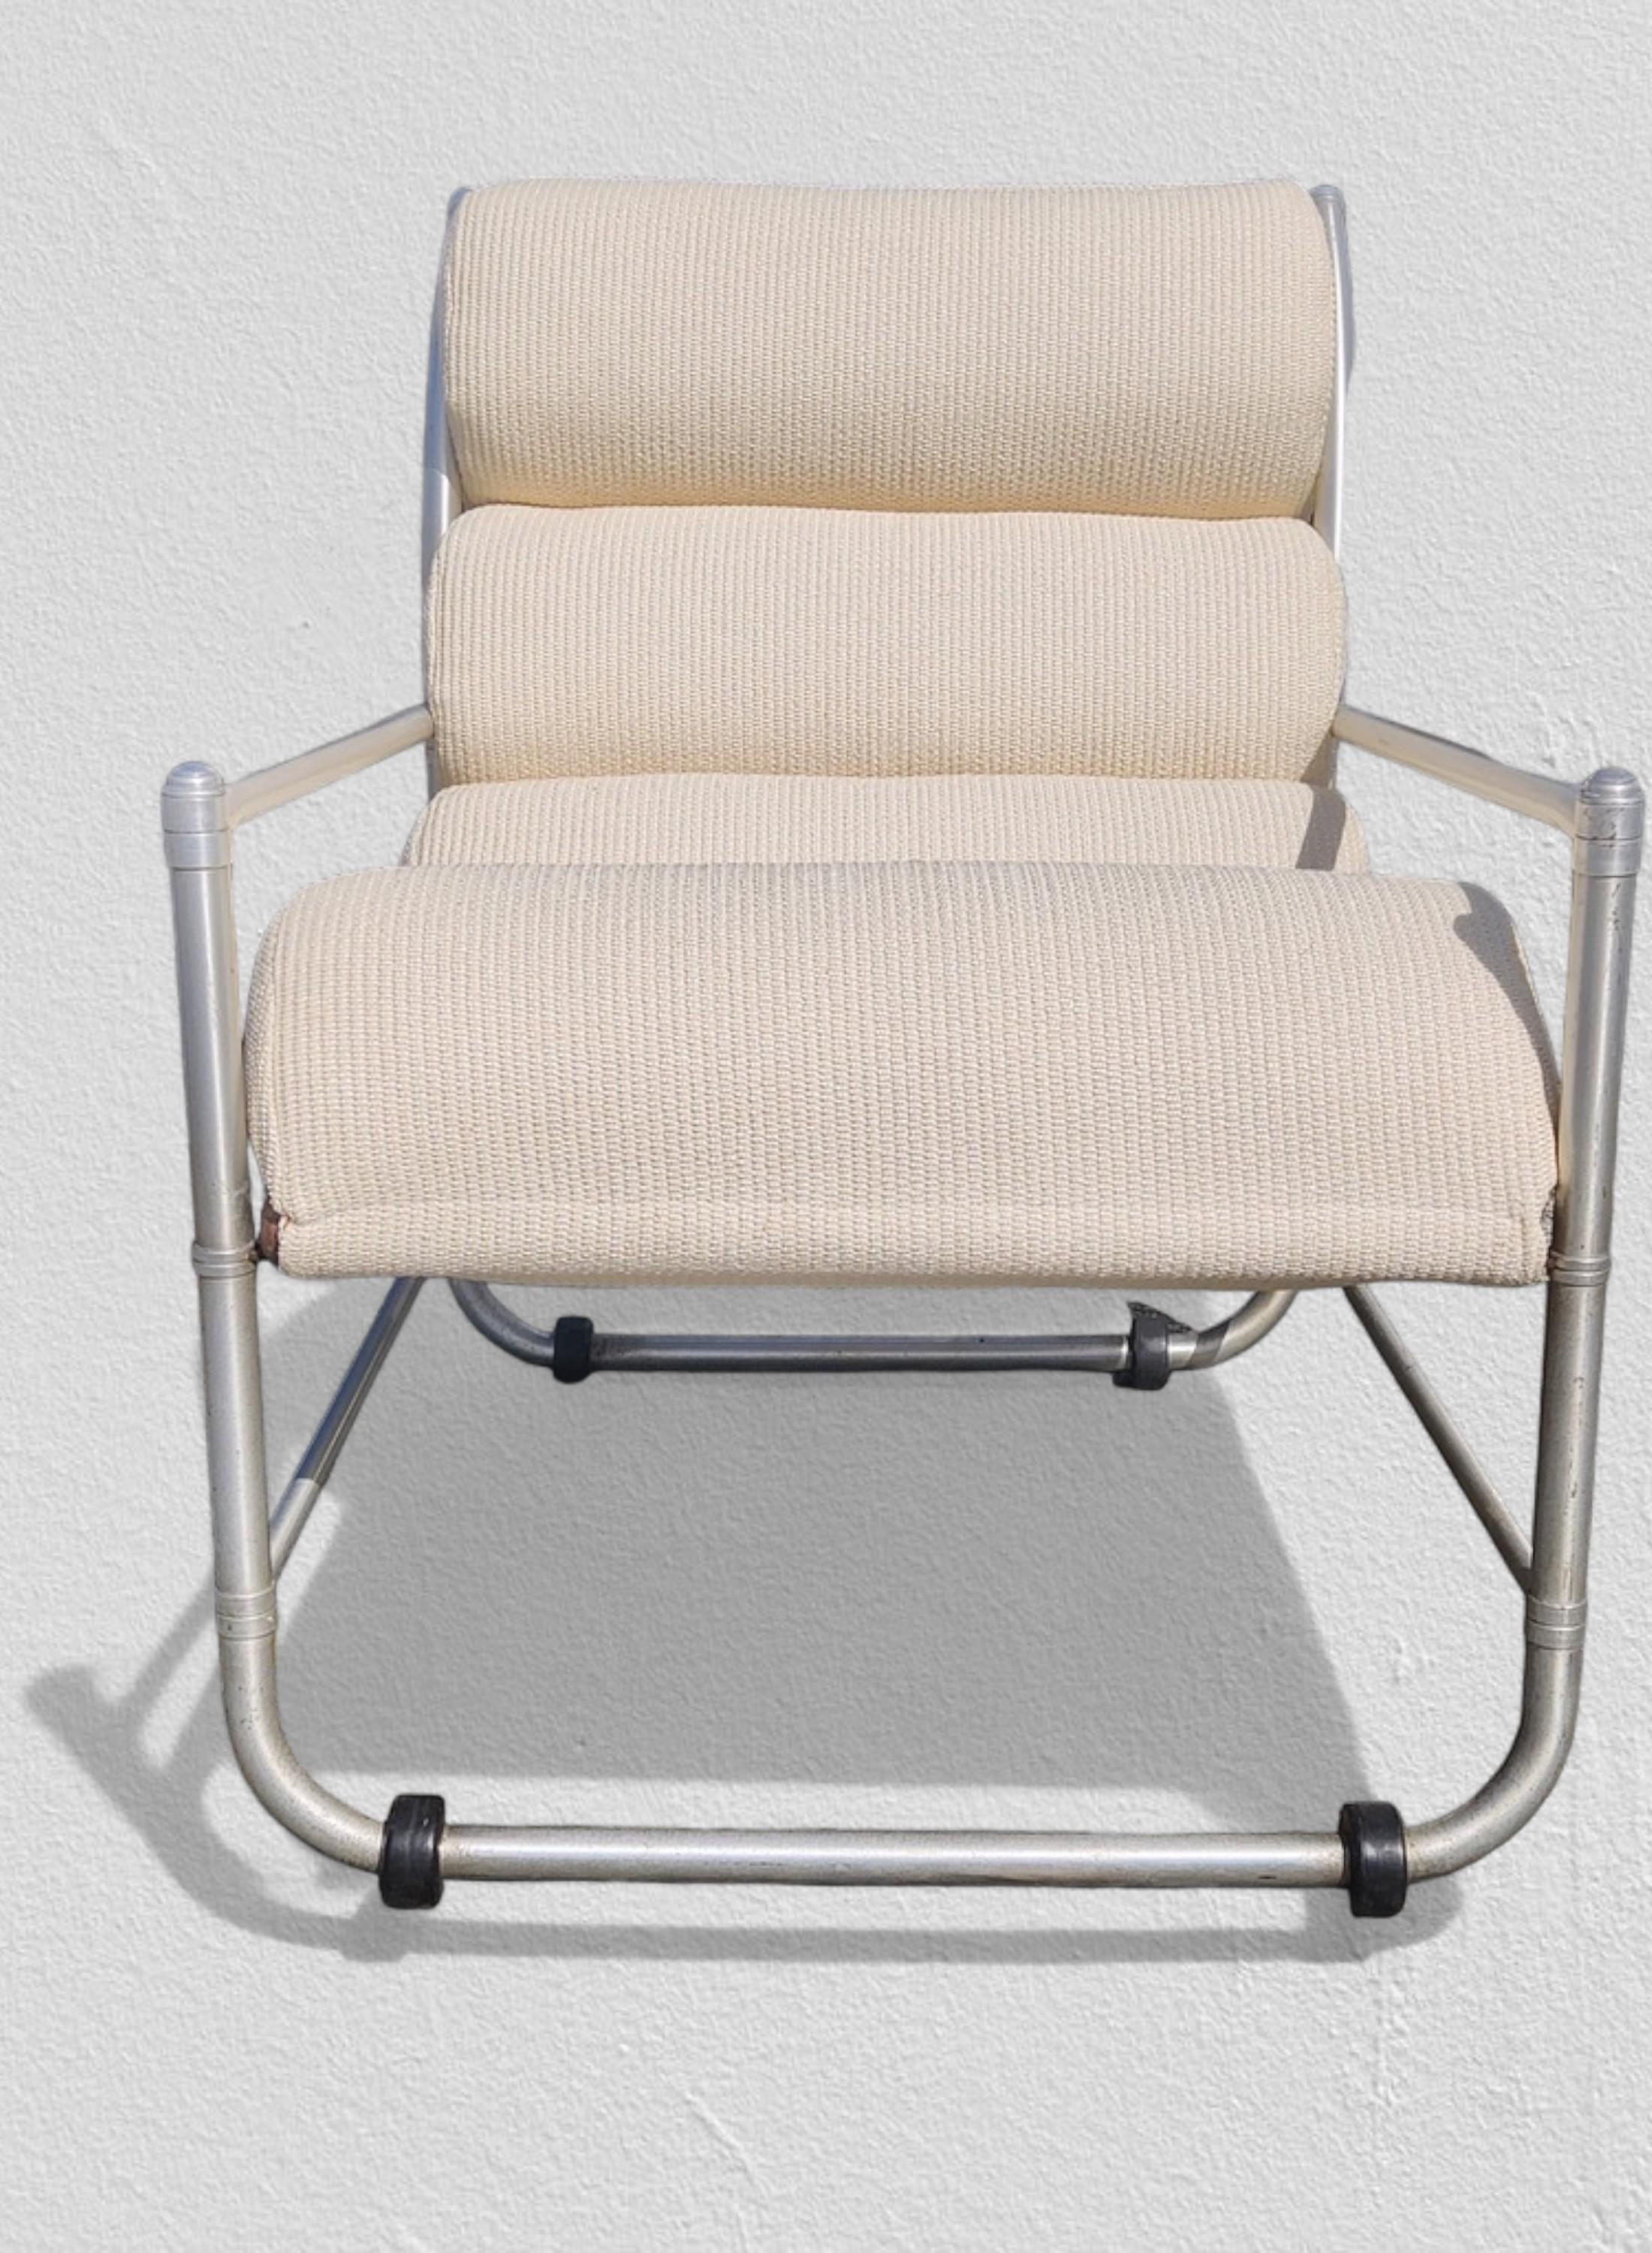 Pair of Aluminum Warren McArthur Sling Chaises / Lounge Chairs, 1938 In Good Condition For Sale In Camden, ME